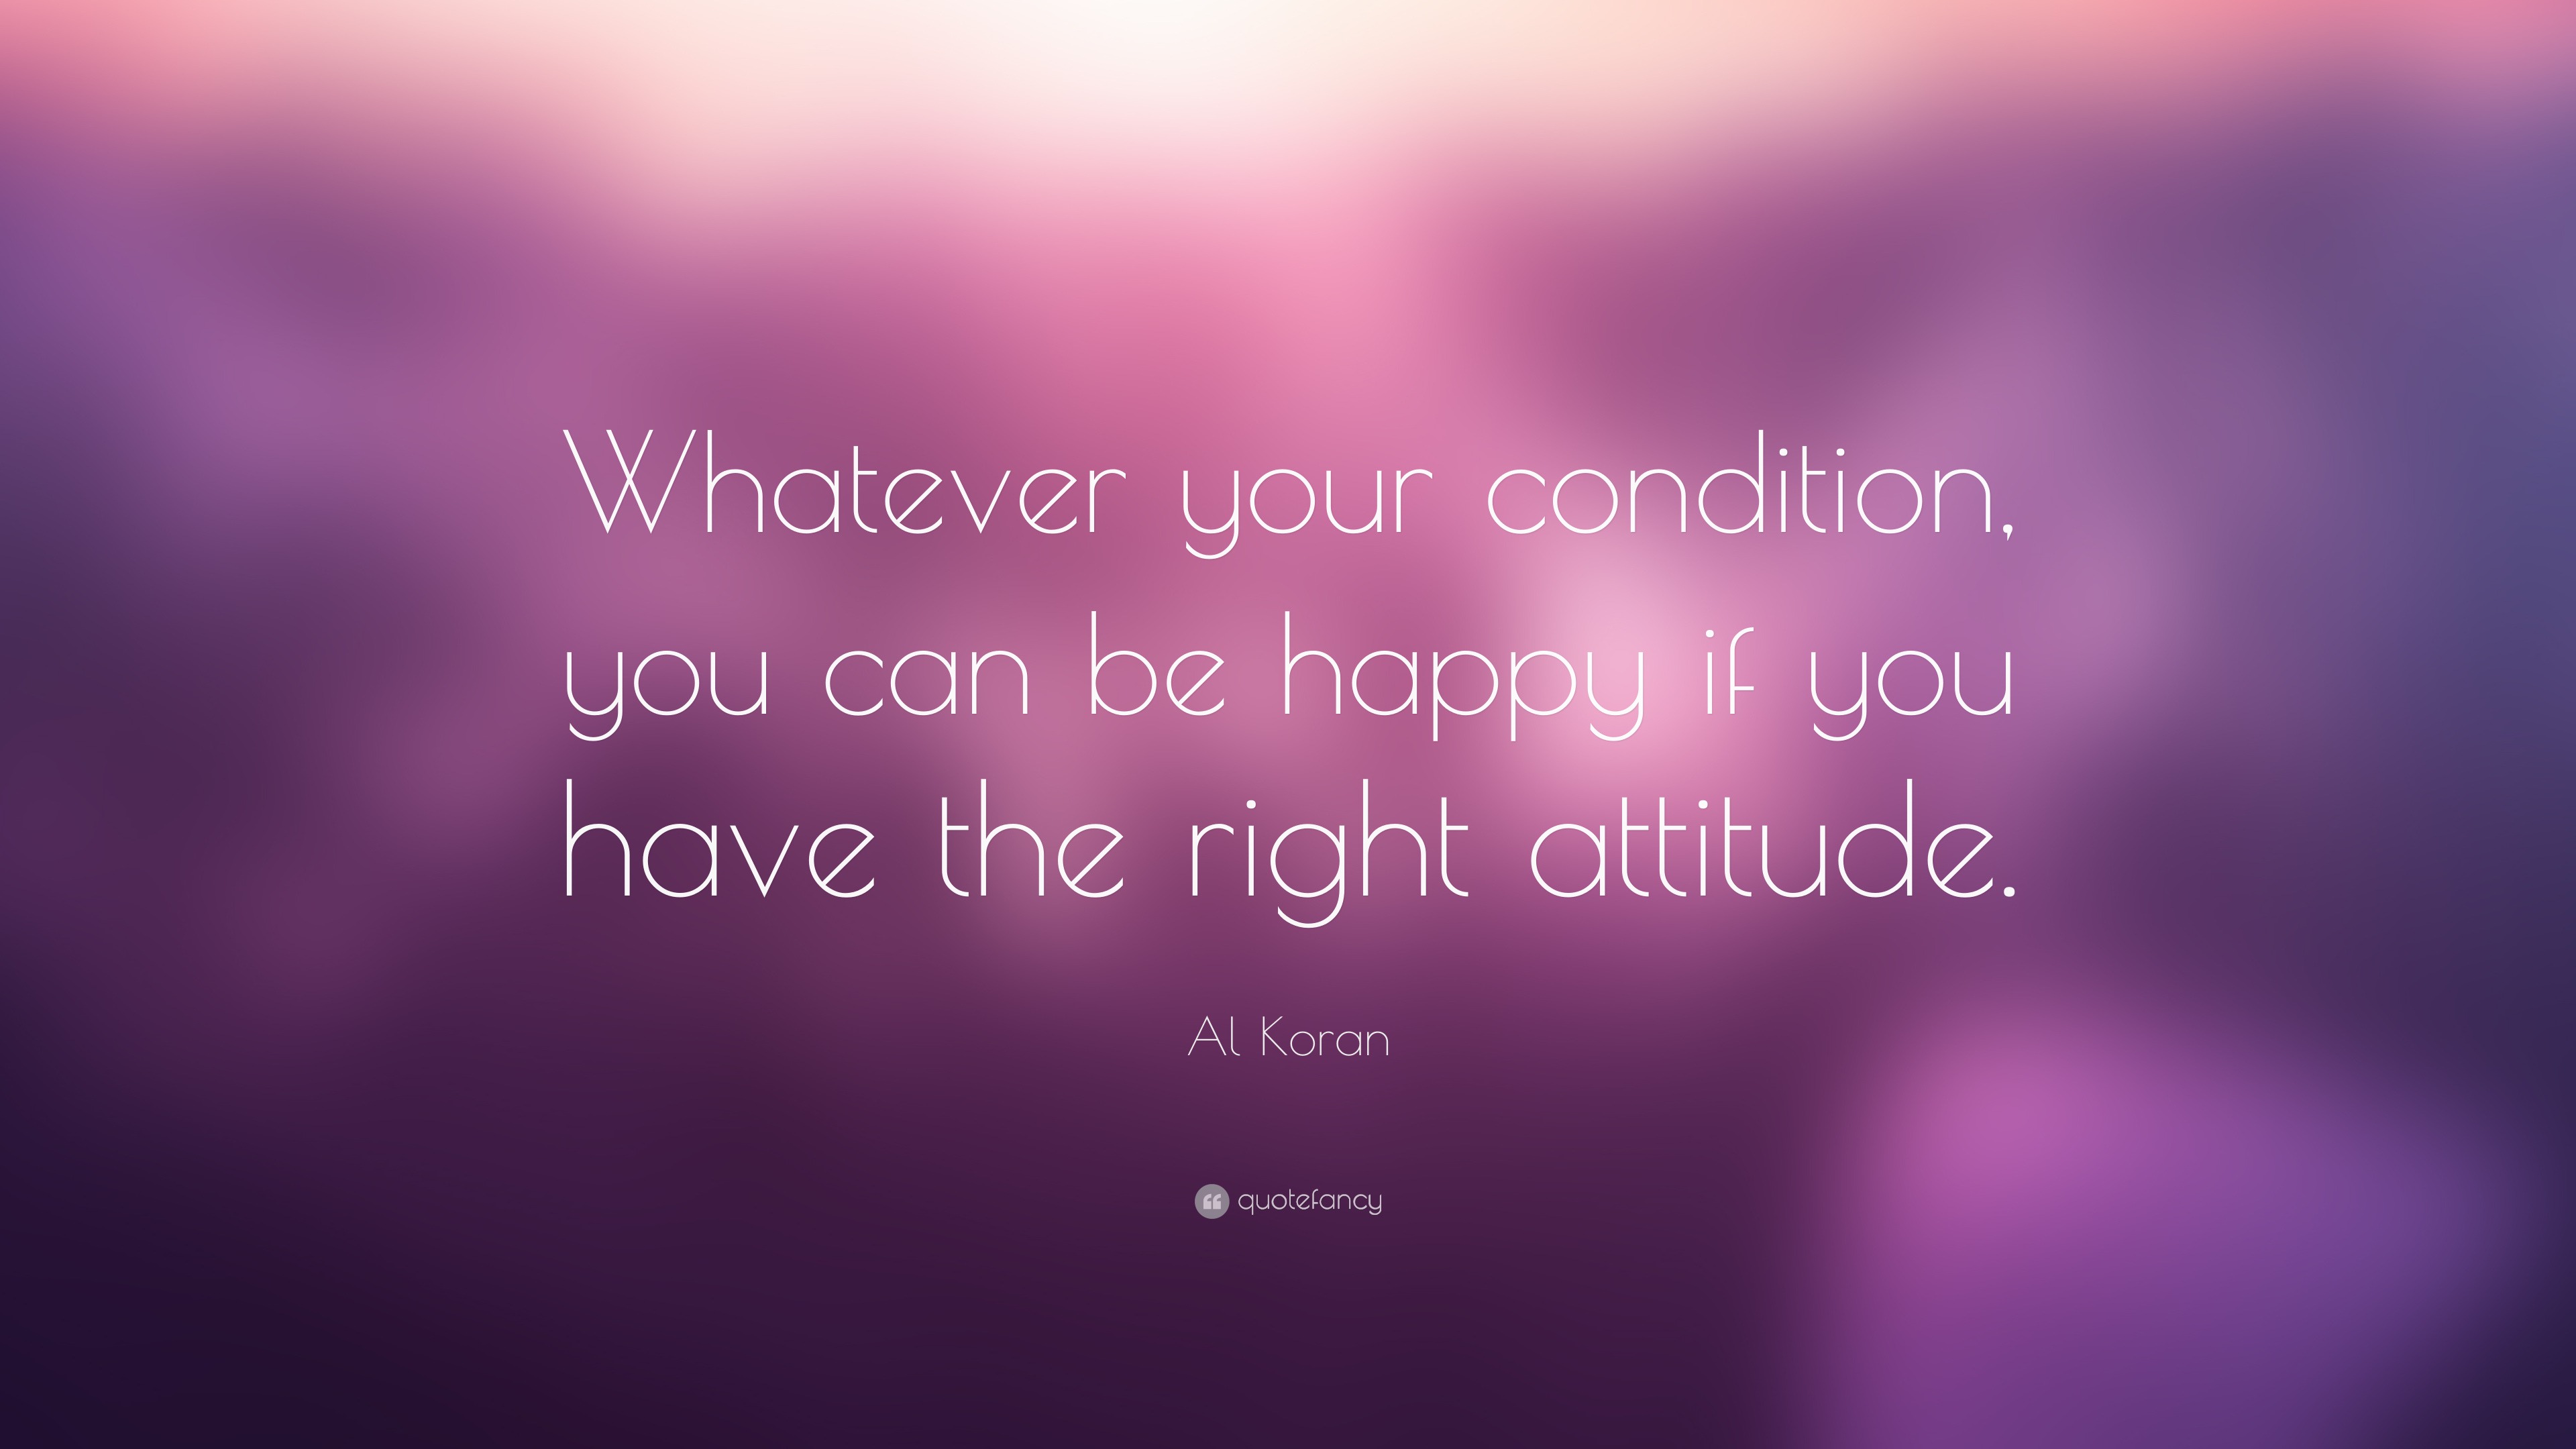 Al Koran Quote: “Whatever your condition, you can be happy if you have ...